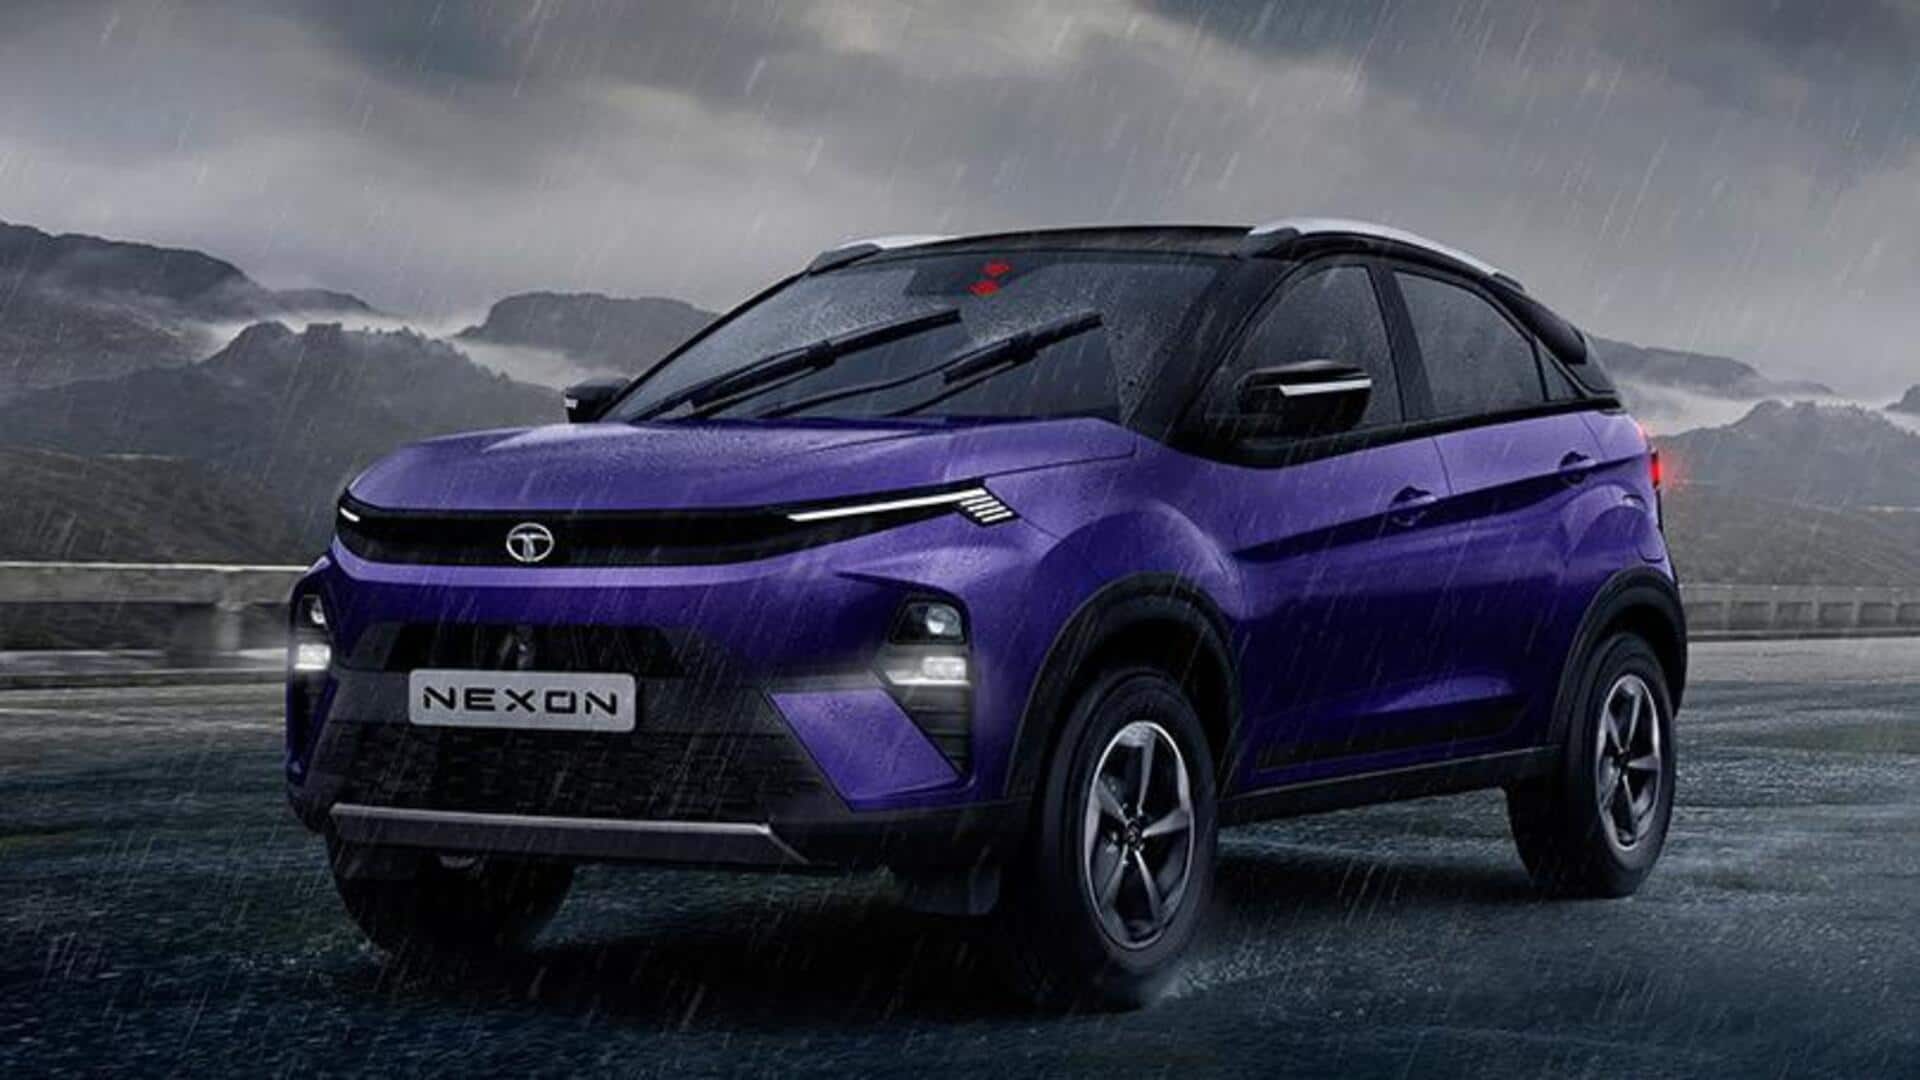 Tata Nexon (facelift) revealed in India: Check out best features